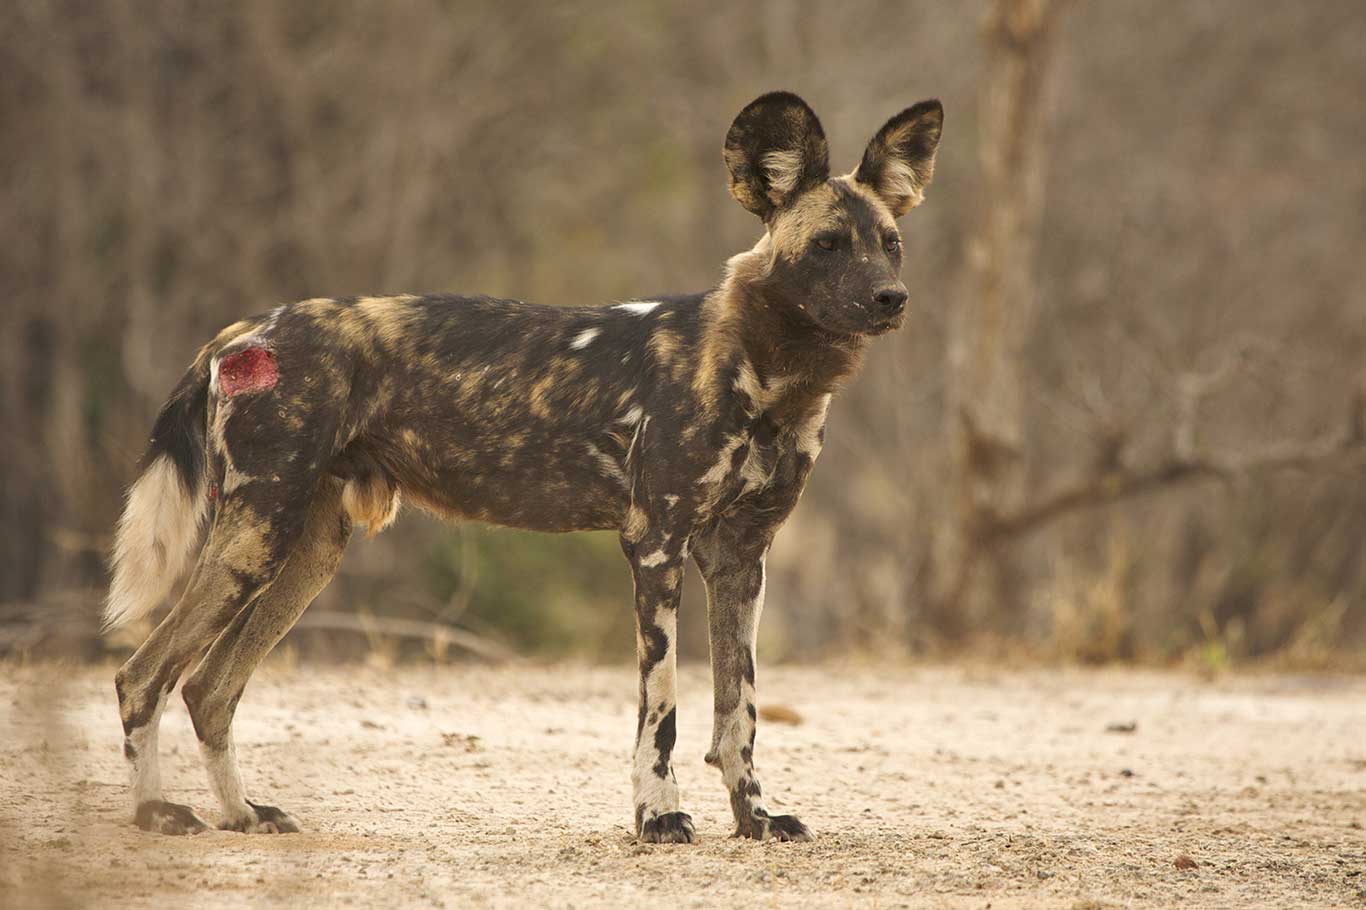 Beautiful Painted Dogs In Grave Danger!